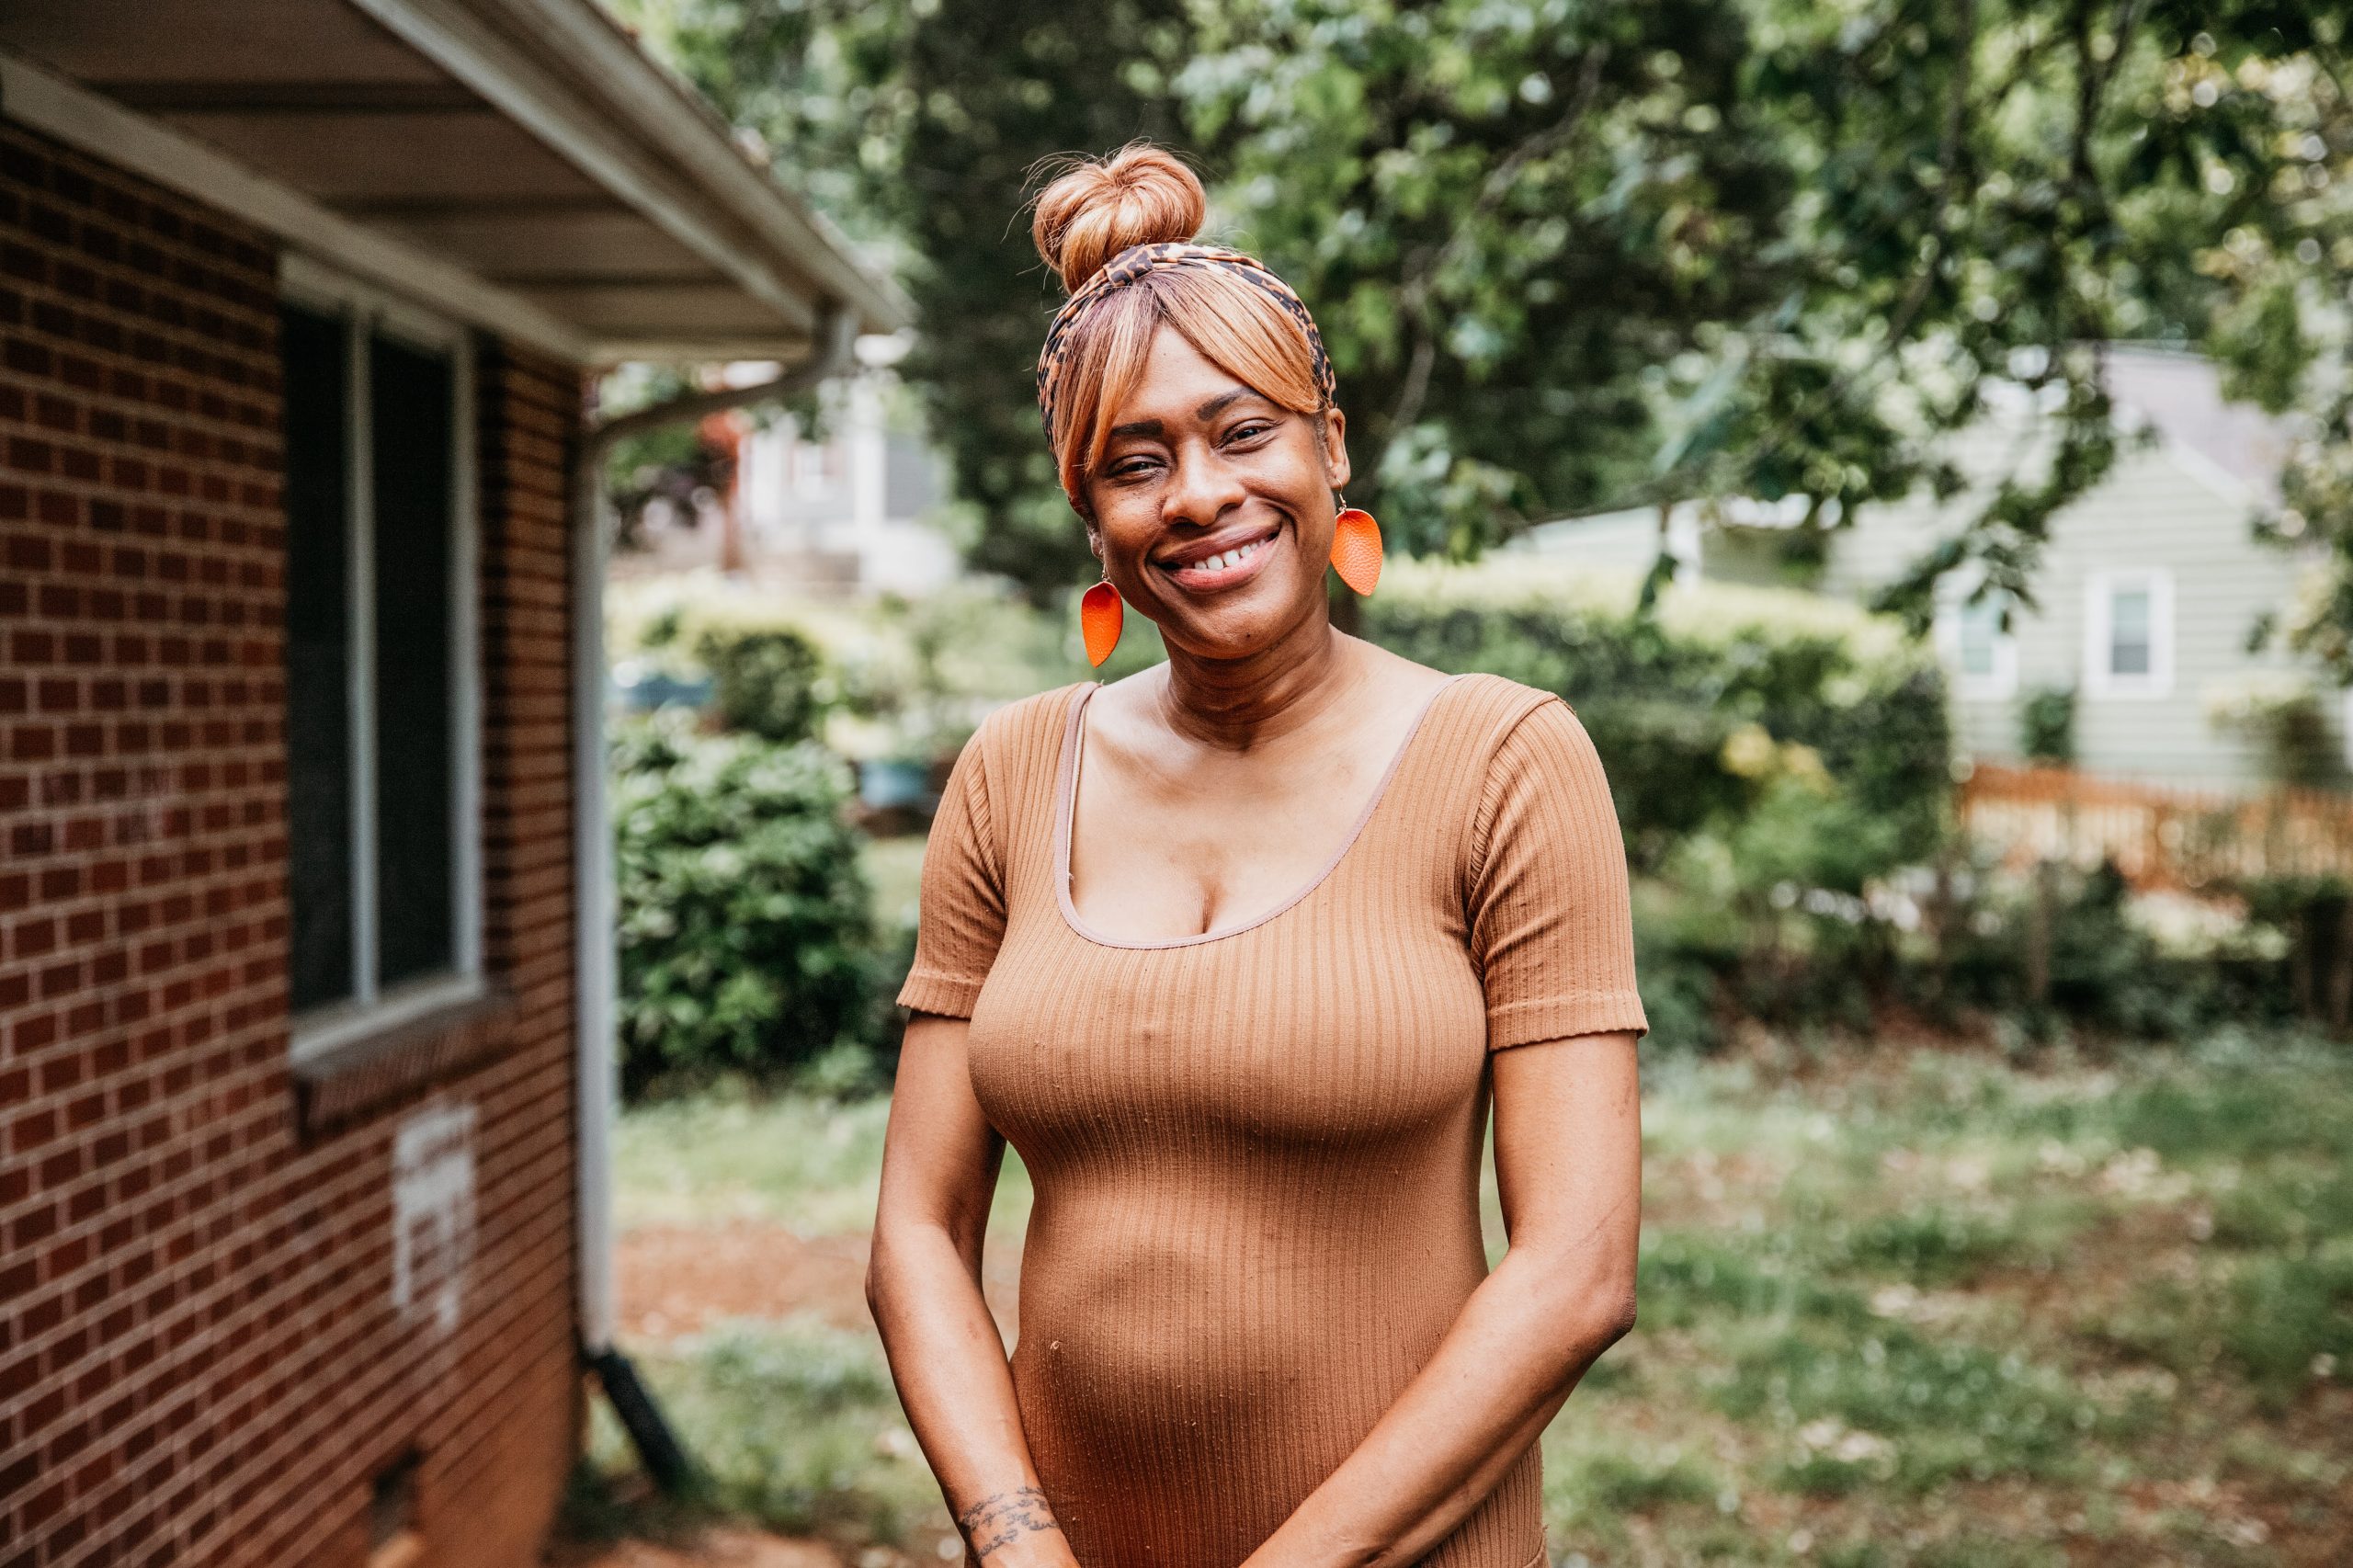 Shenika Phillips smiles bright while standing outside. She's wearing a short-sleeved brown jumpsuit and orange leaf-shaped earrings. Her hair is tied up in a bun. 